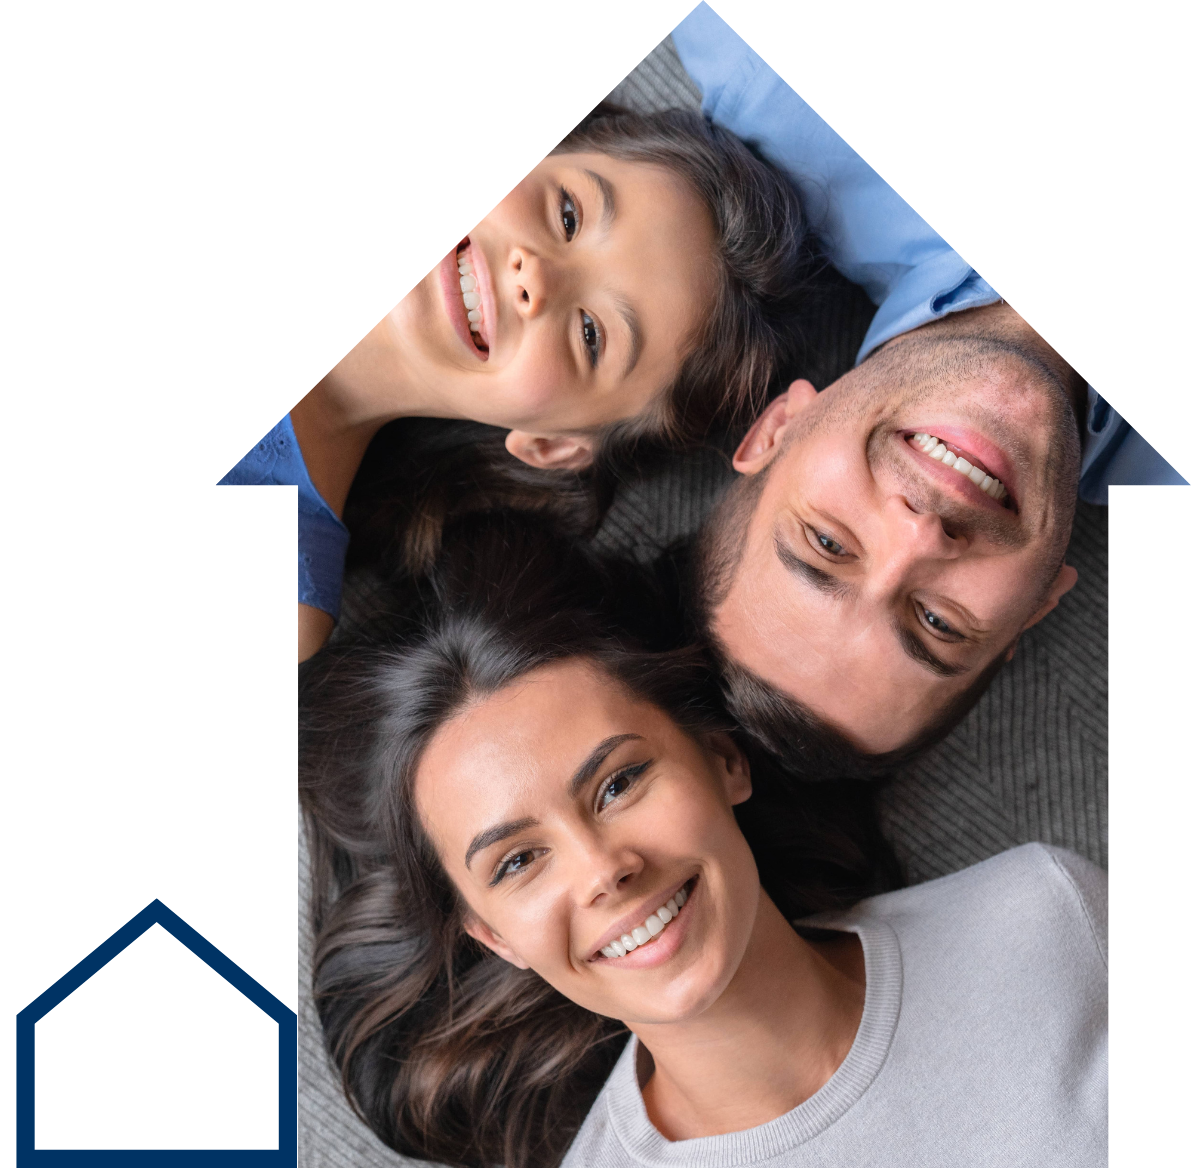 Find your dream home with our mortgage solutions!